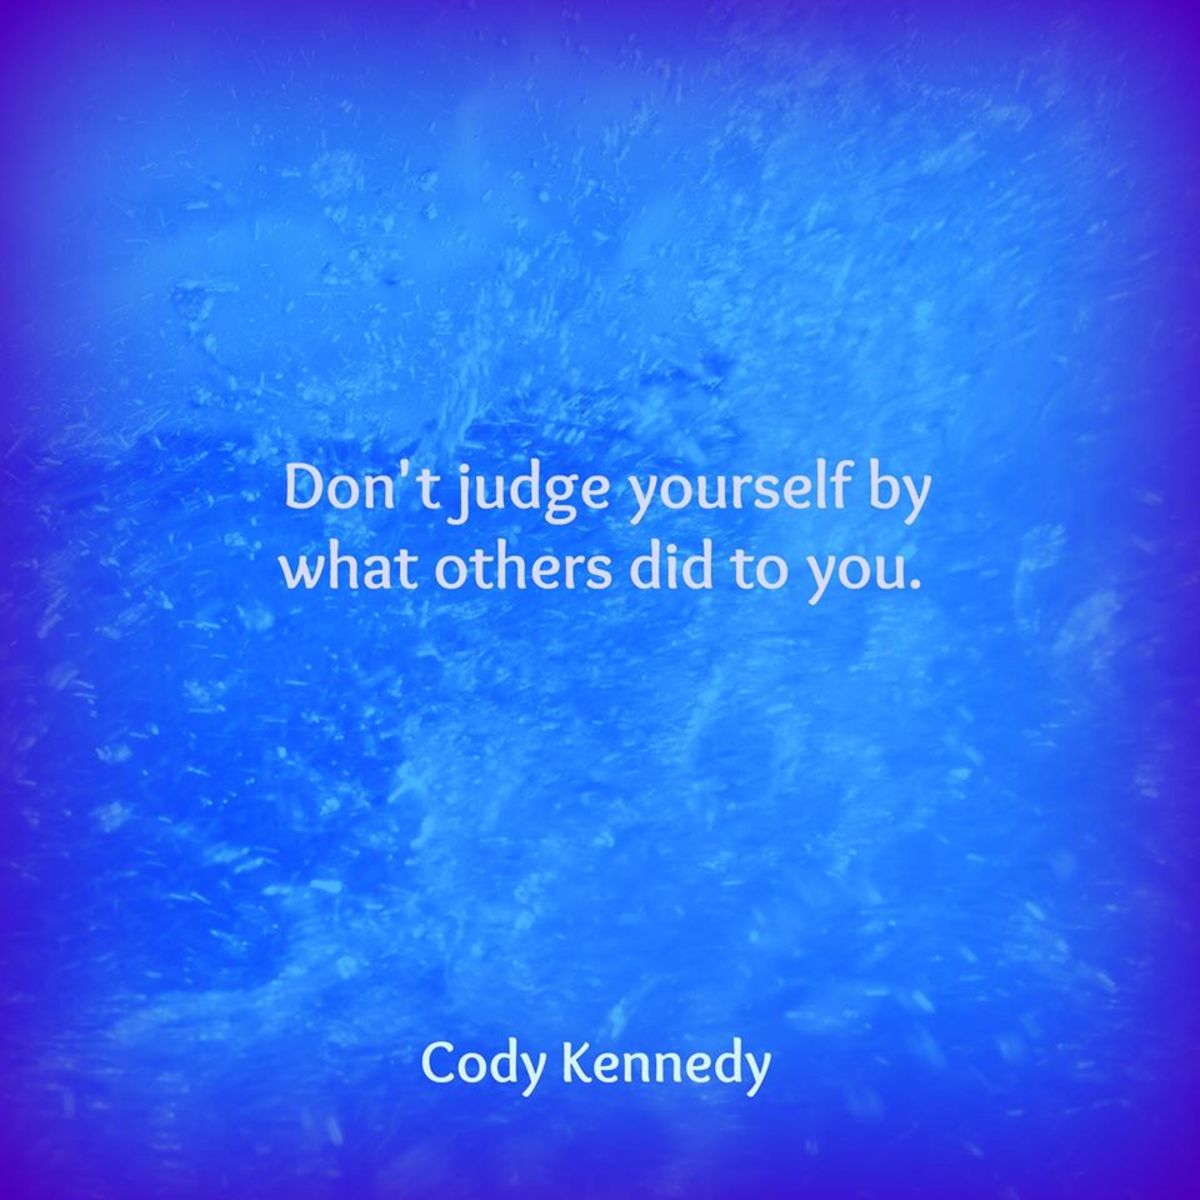 Don't judge yourself by what others did to you.